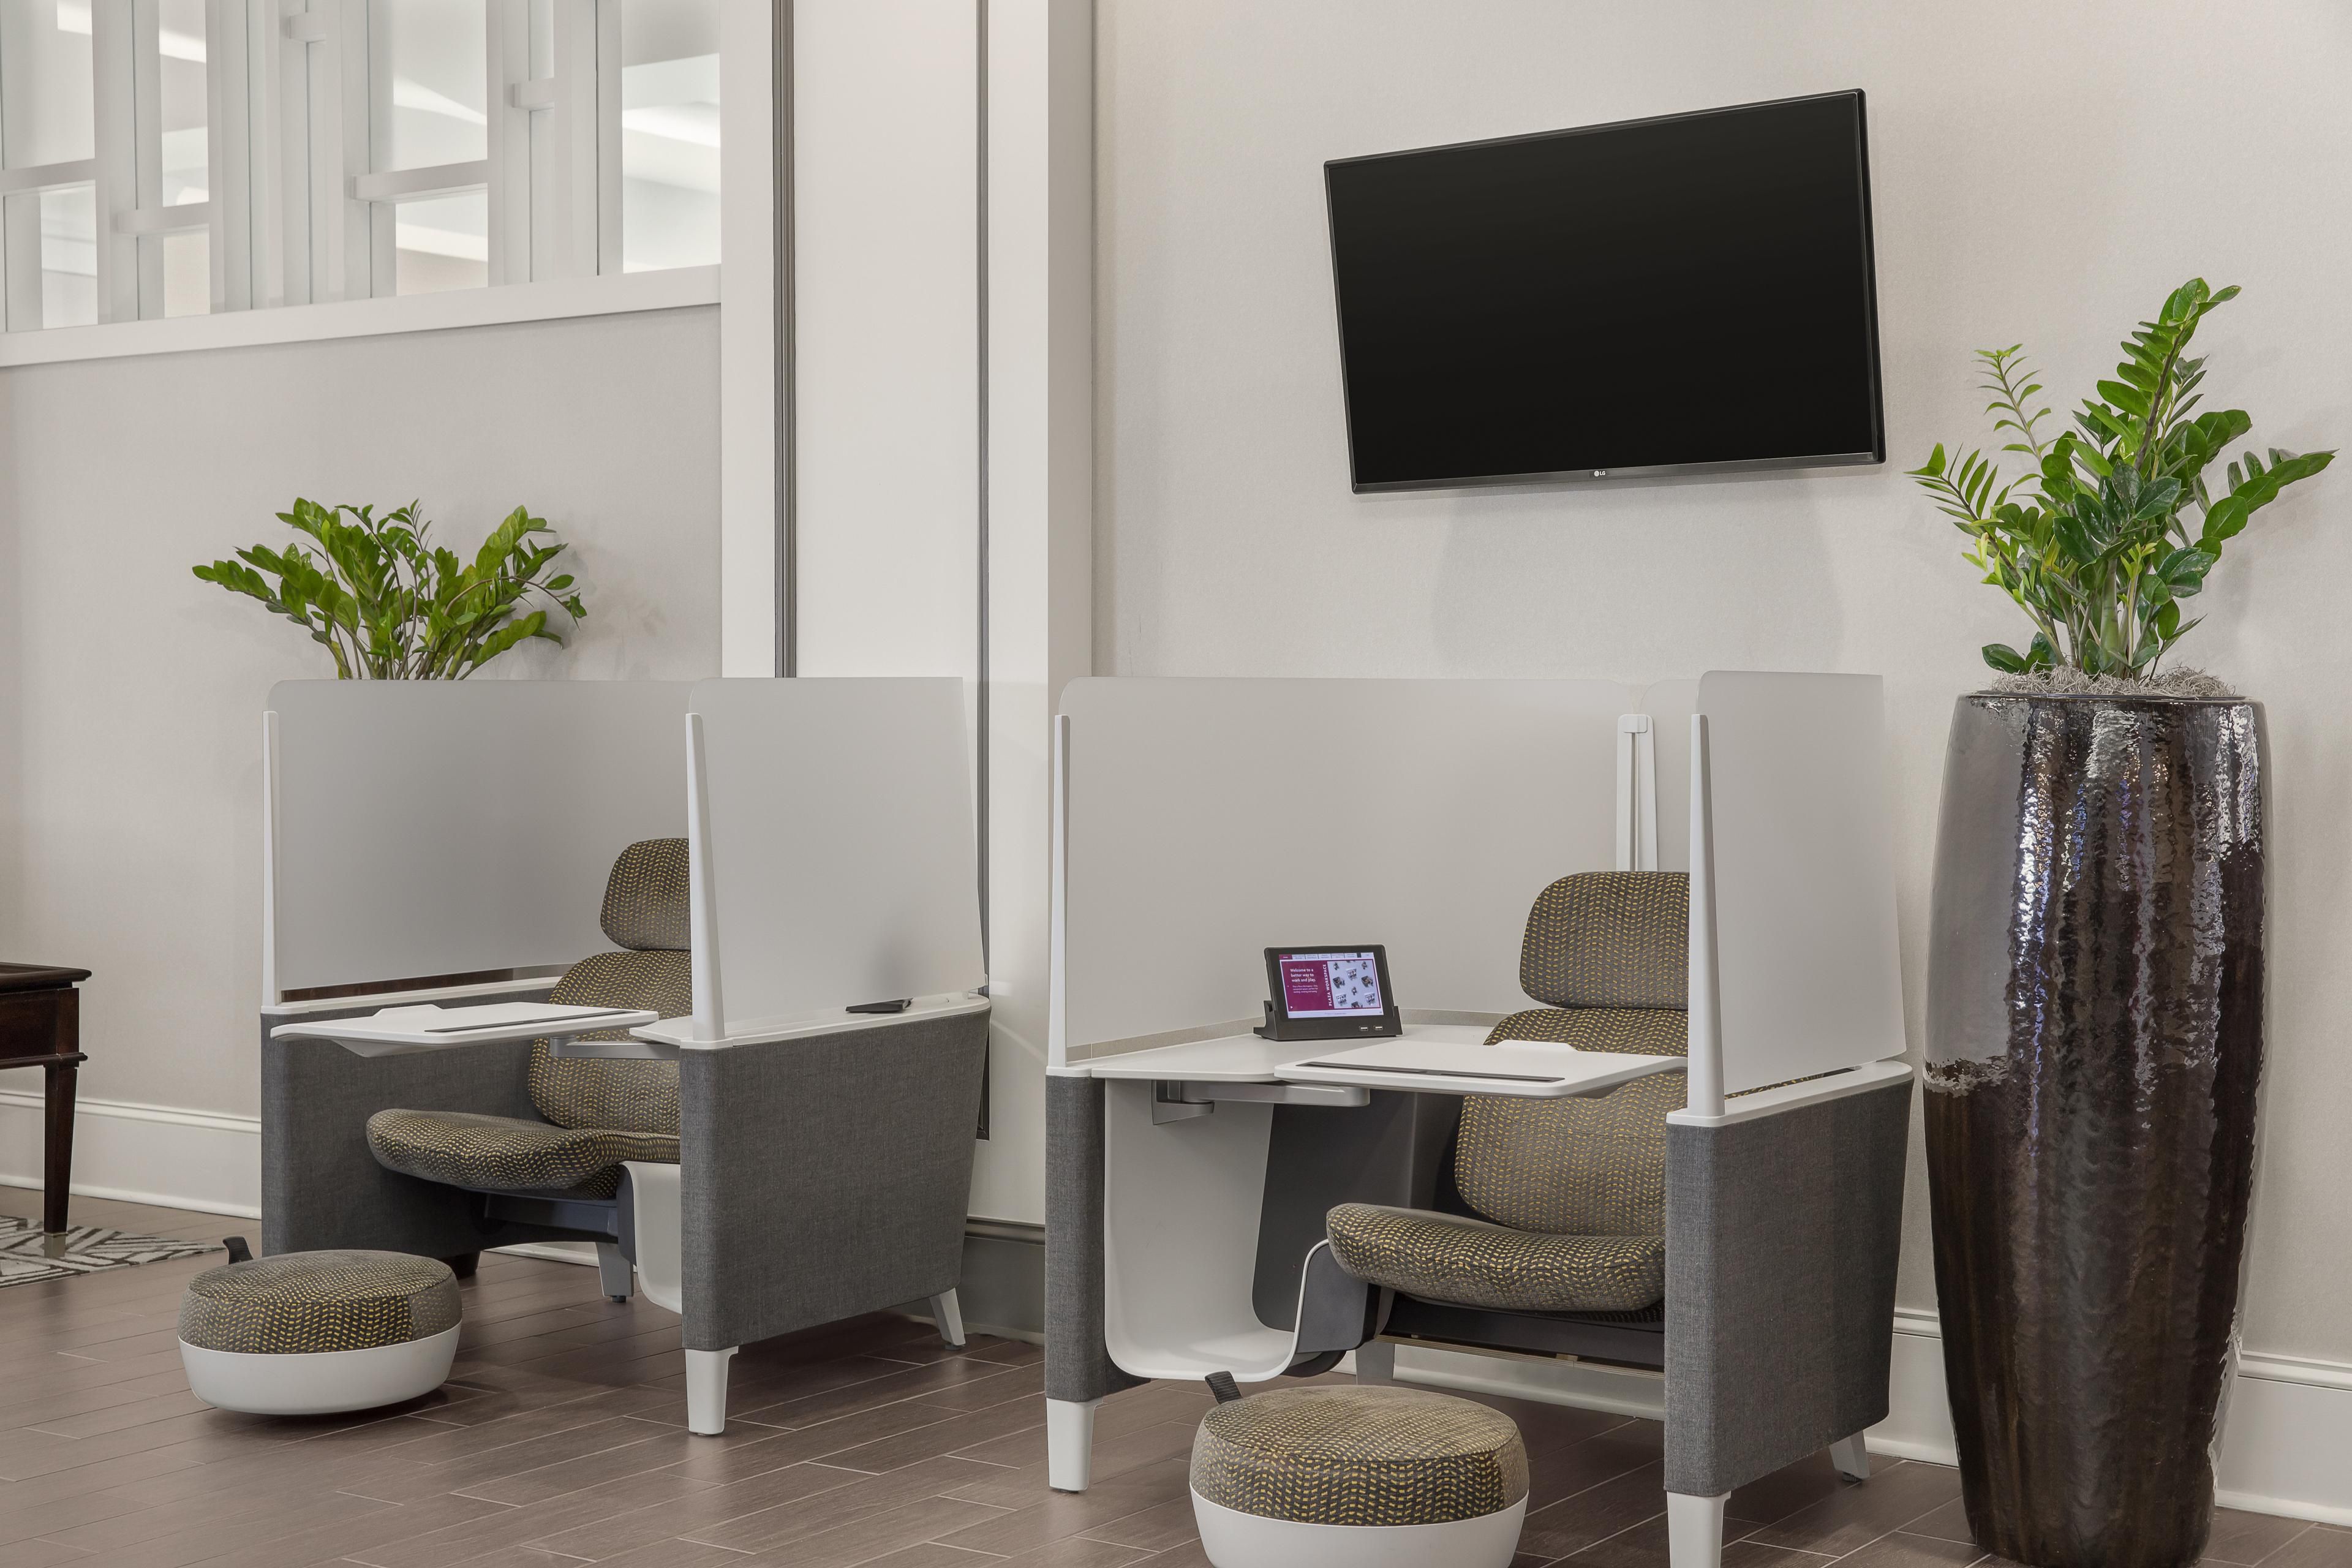 Private workspace with USB chargers for completing those tasks